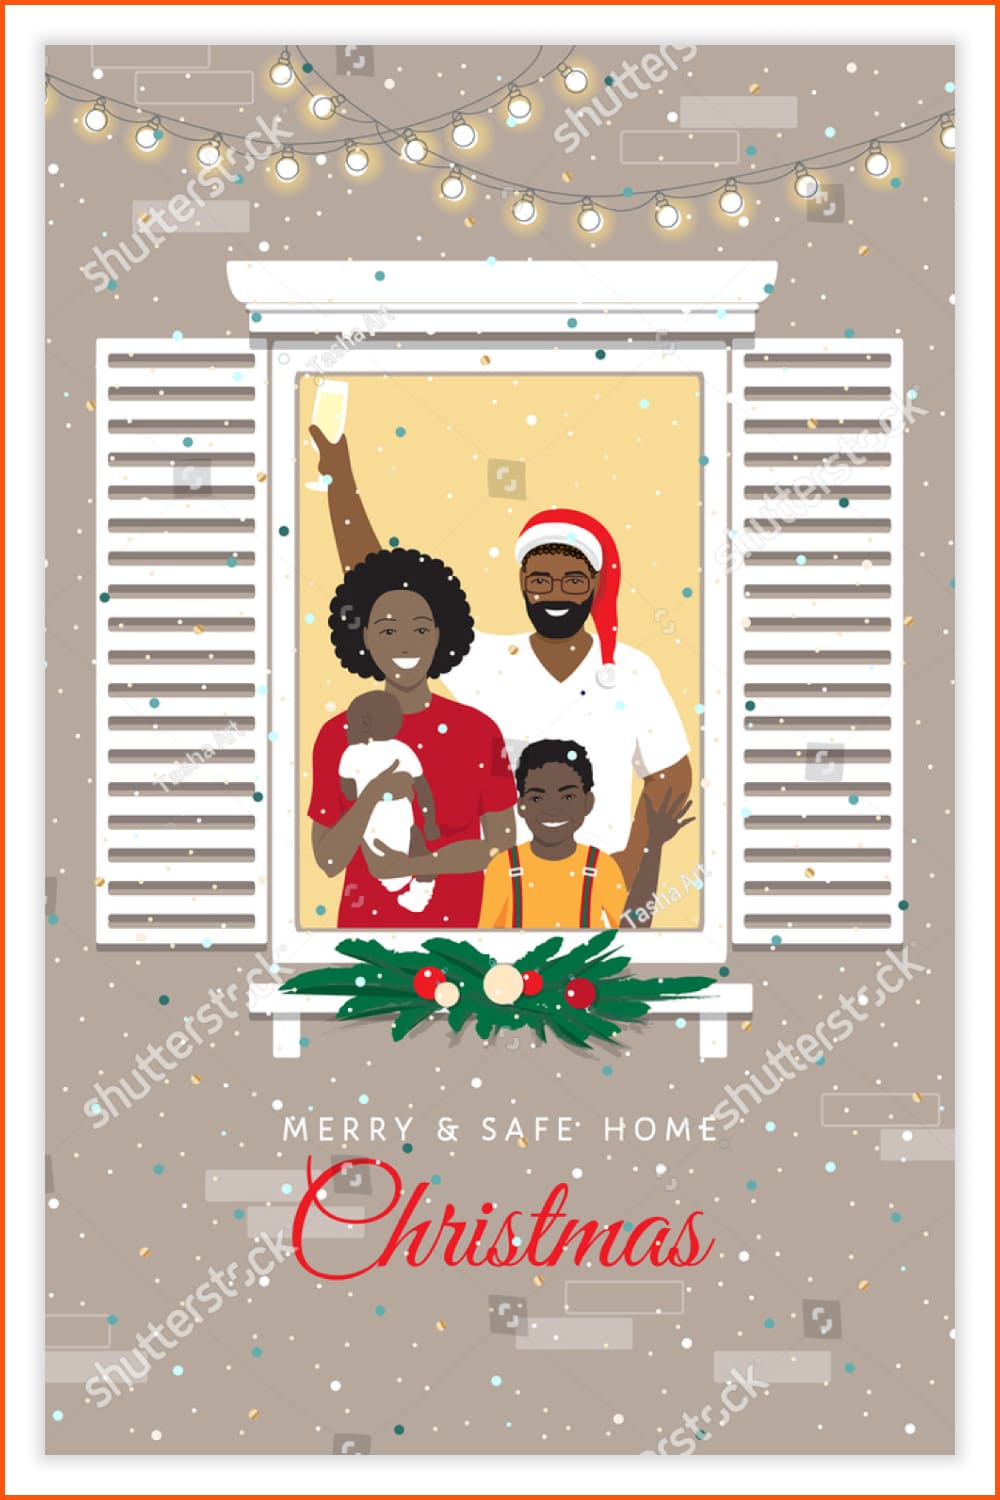 A happy cheerful African American family of parents and young children at a window.